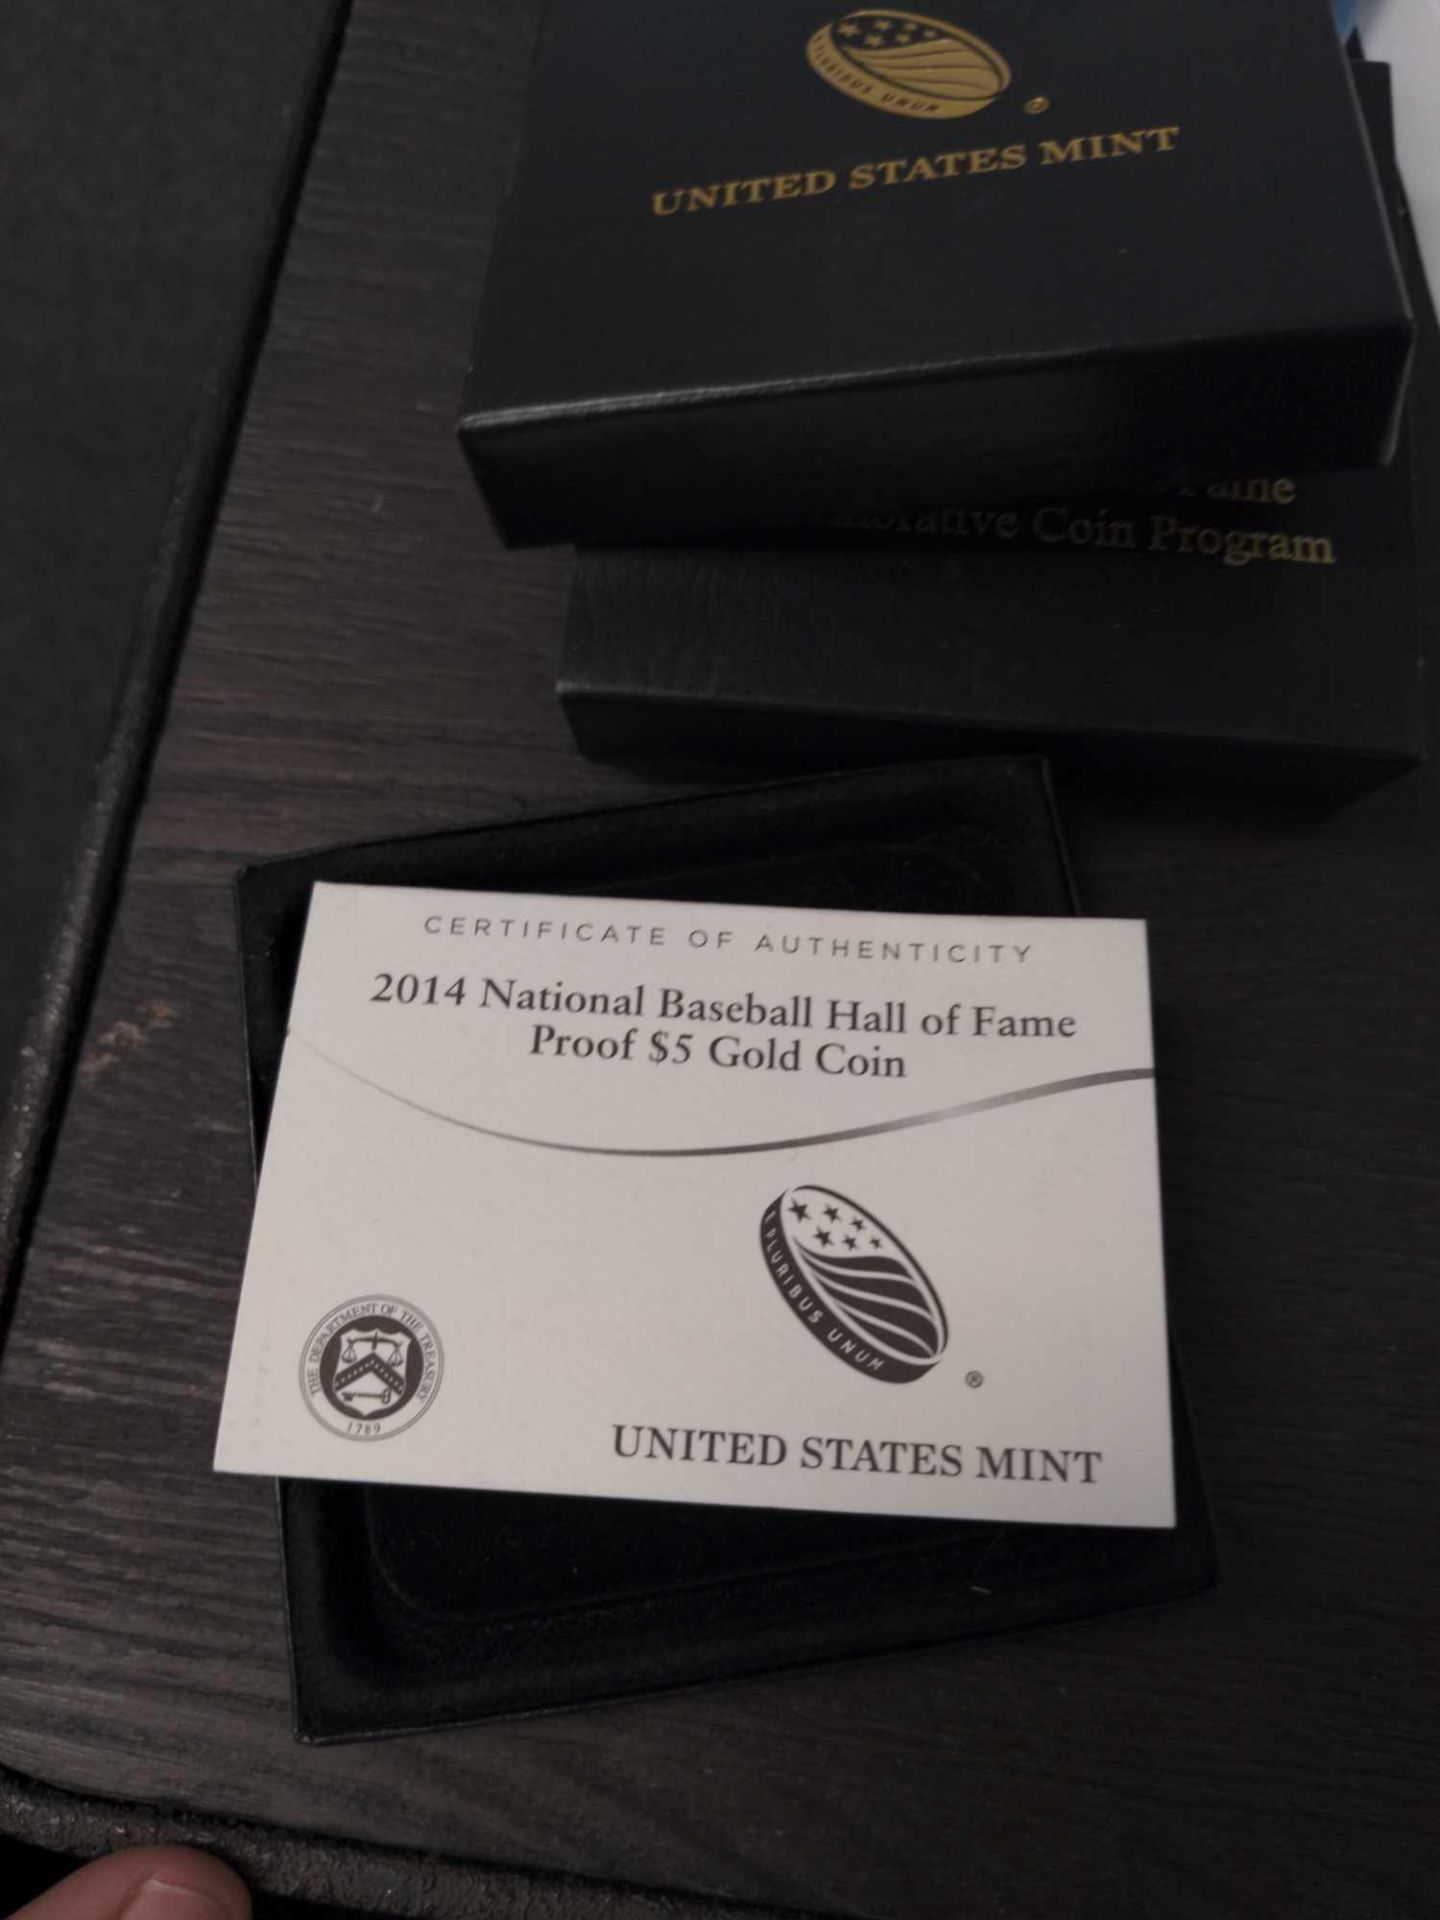 United States Mint Uncirculated Baseball Gold Coin - Image 2 of 7